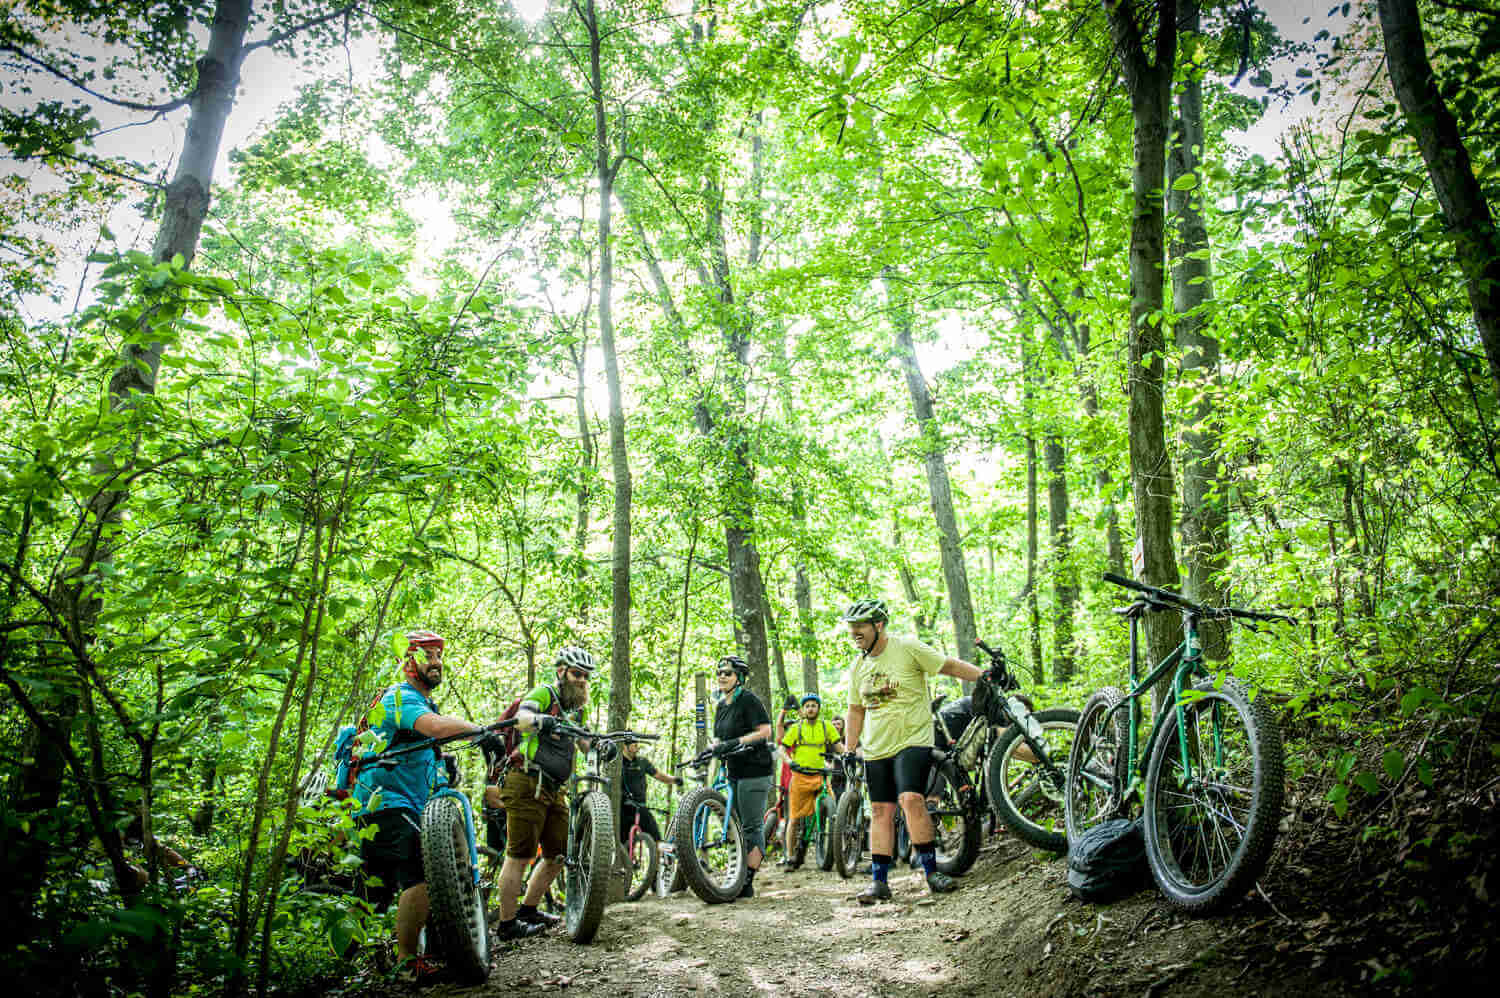 A group of cyclists, standing with their Surly fat bikes, on a dirt trail in a green forest